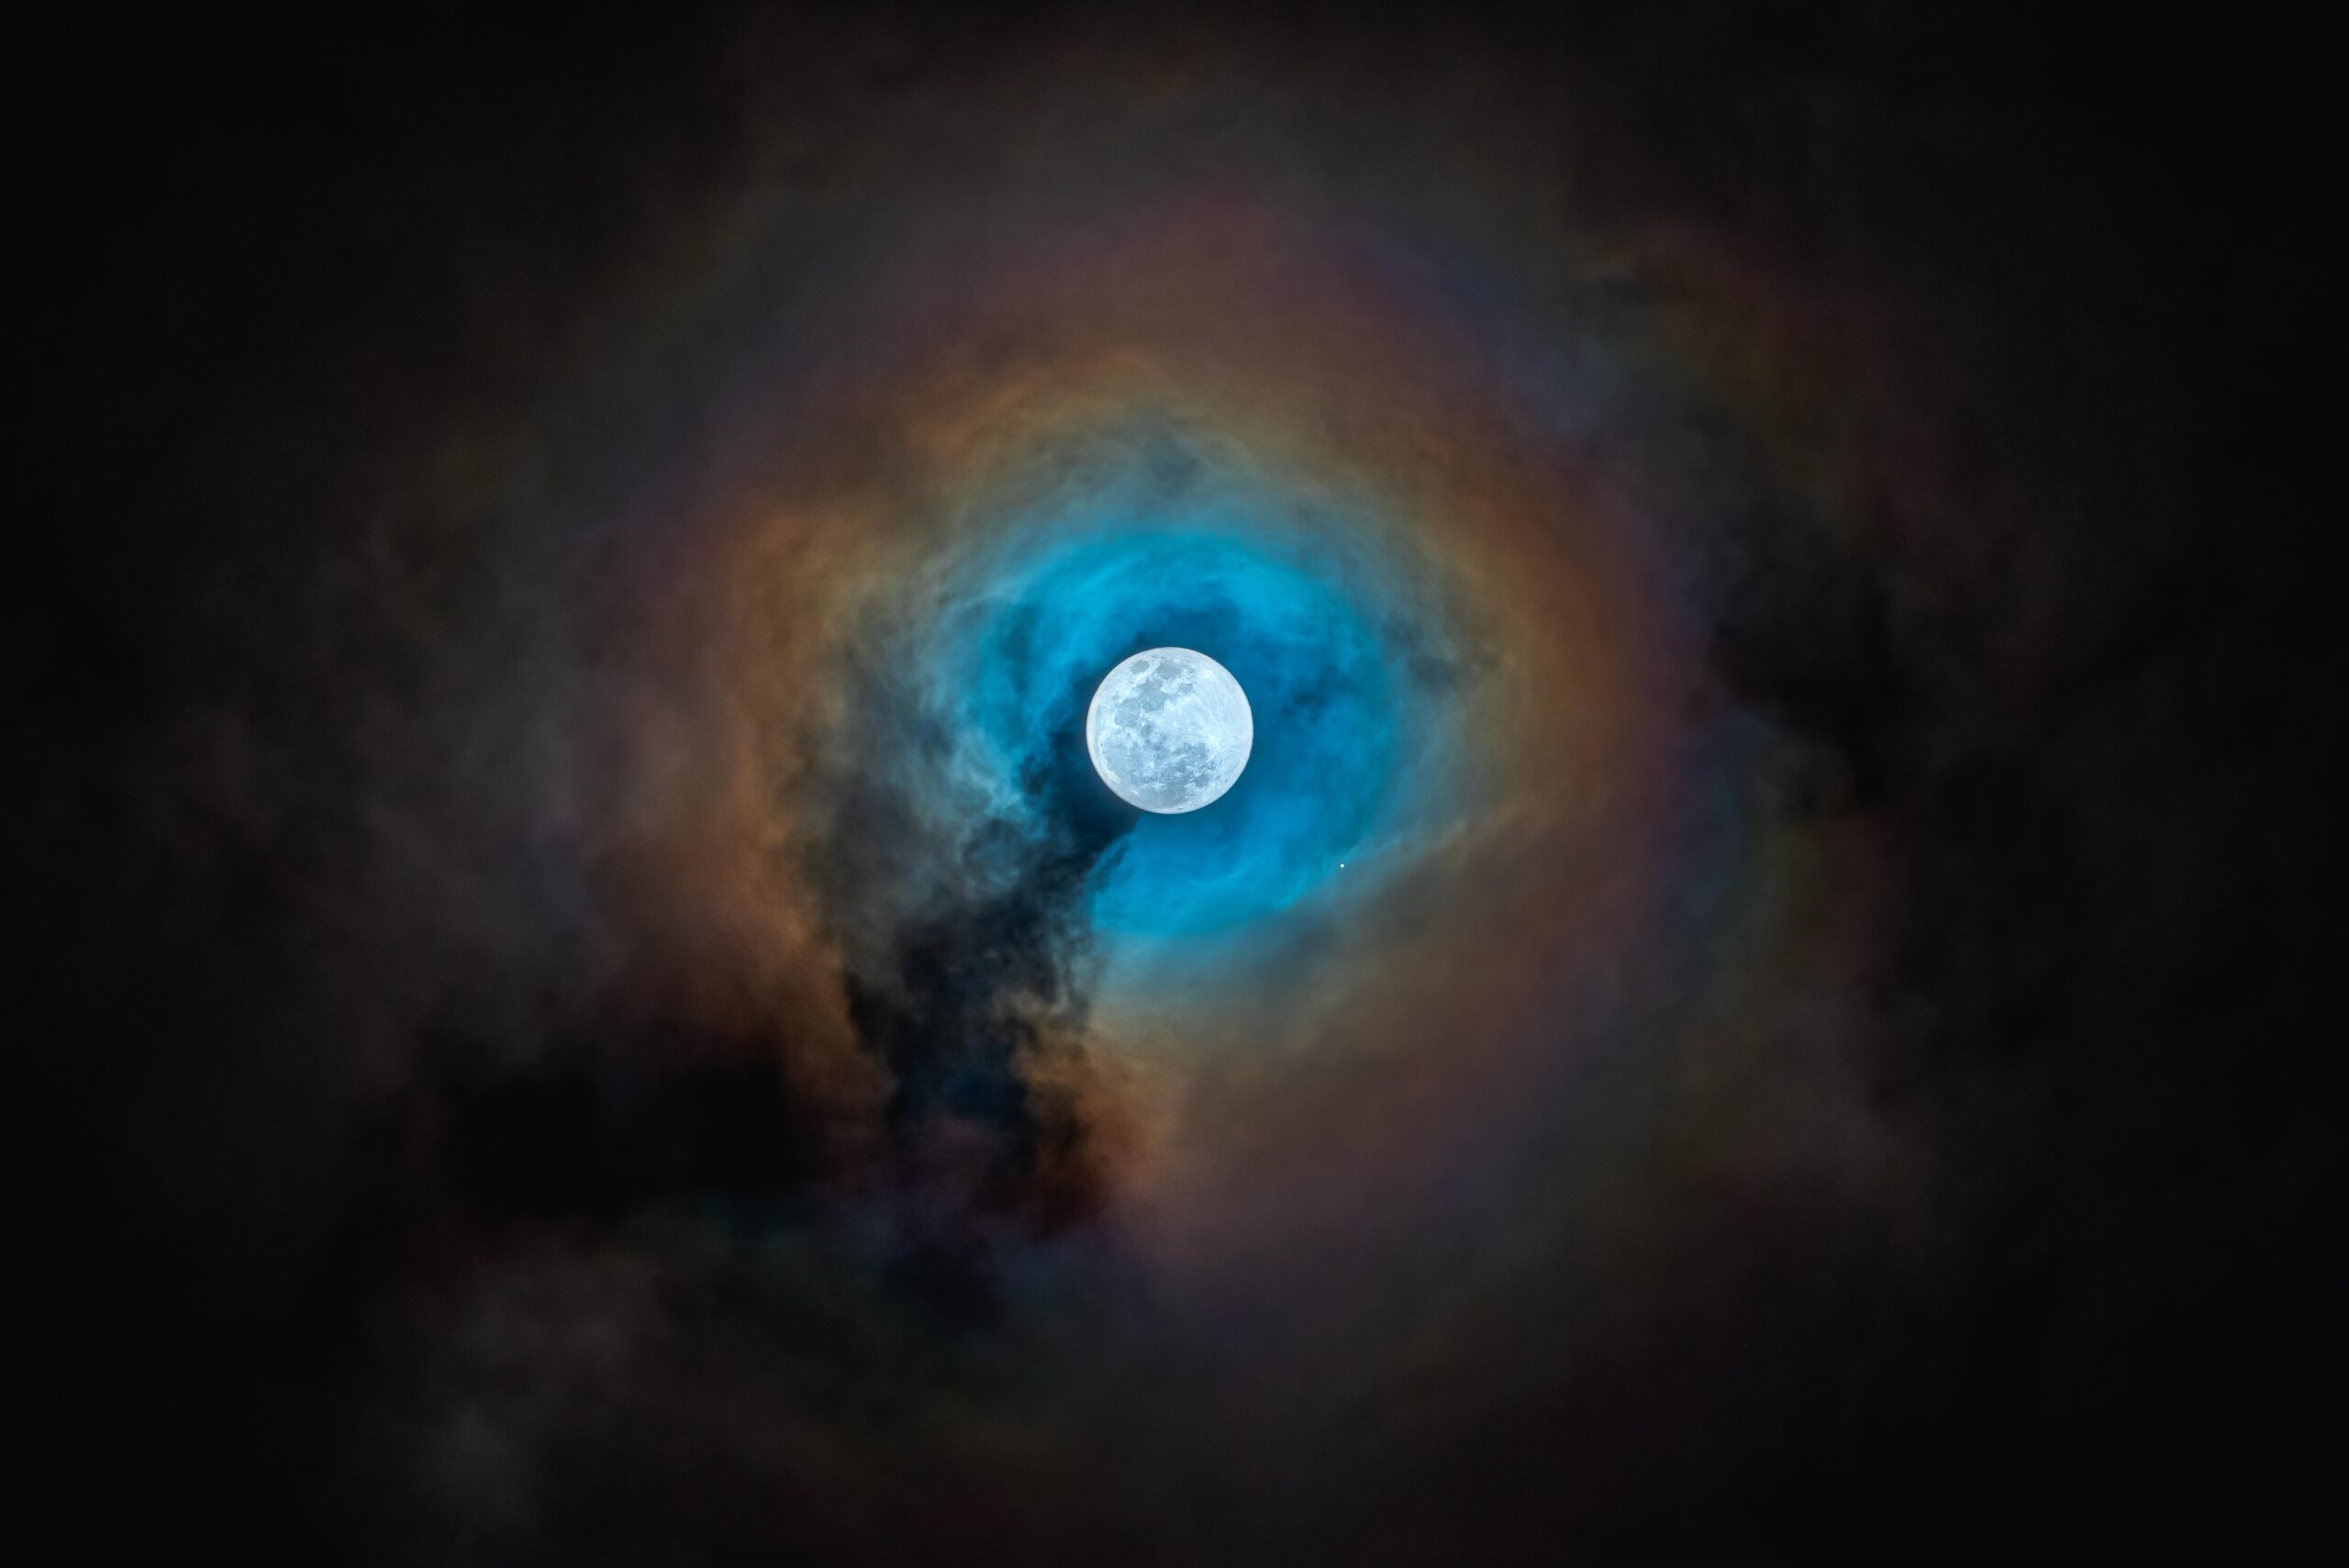 Full moon with an iridescent ring